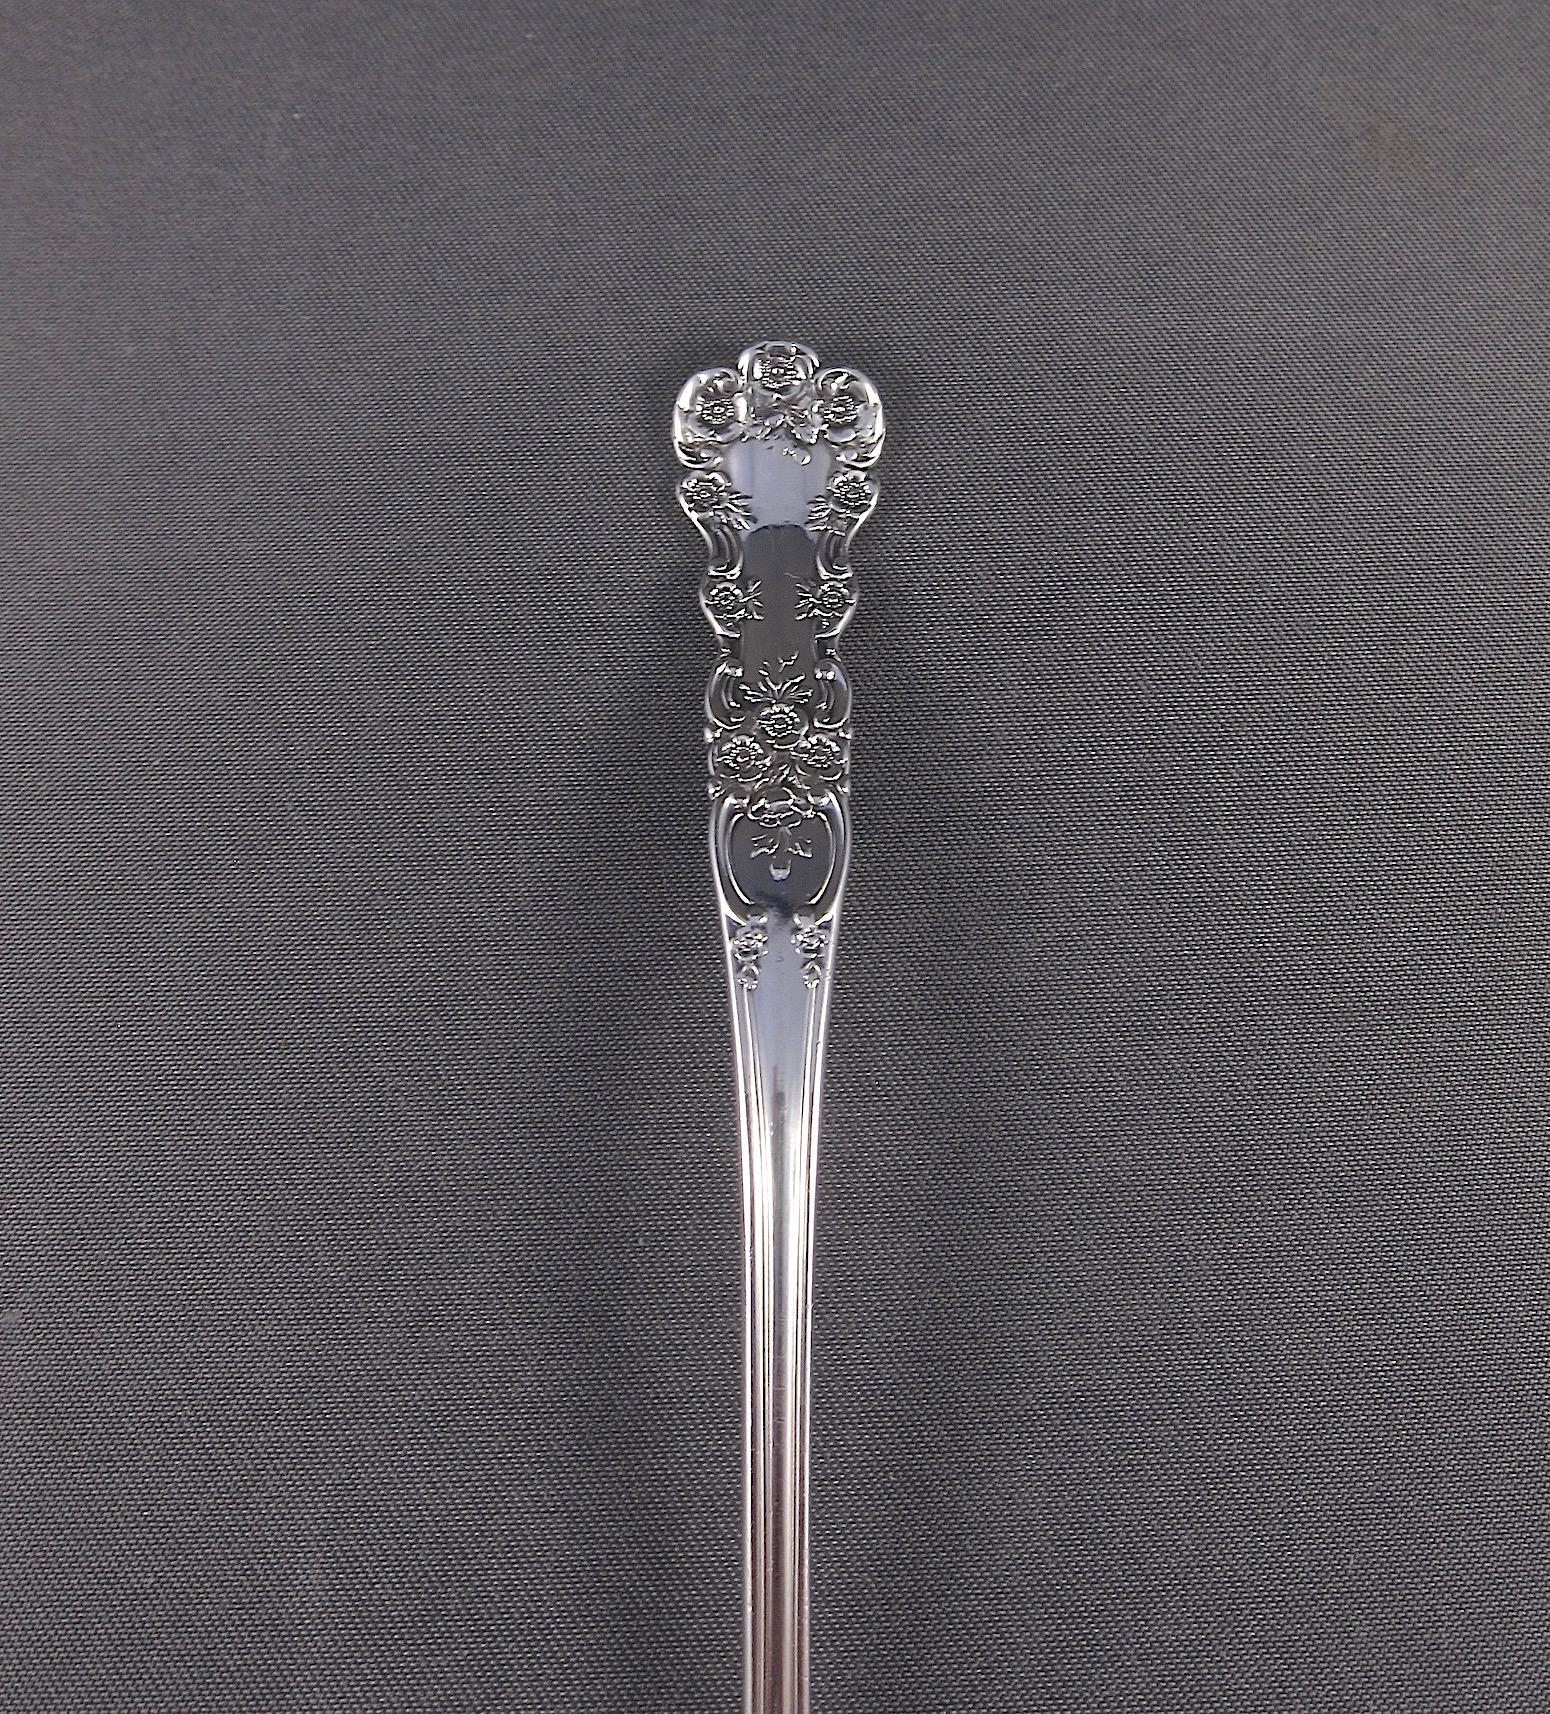 American Antique Gorham Buttercup Sterling Silver Mustard Spoon from the Rockefeller Sale